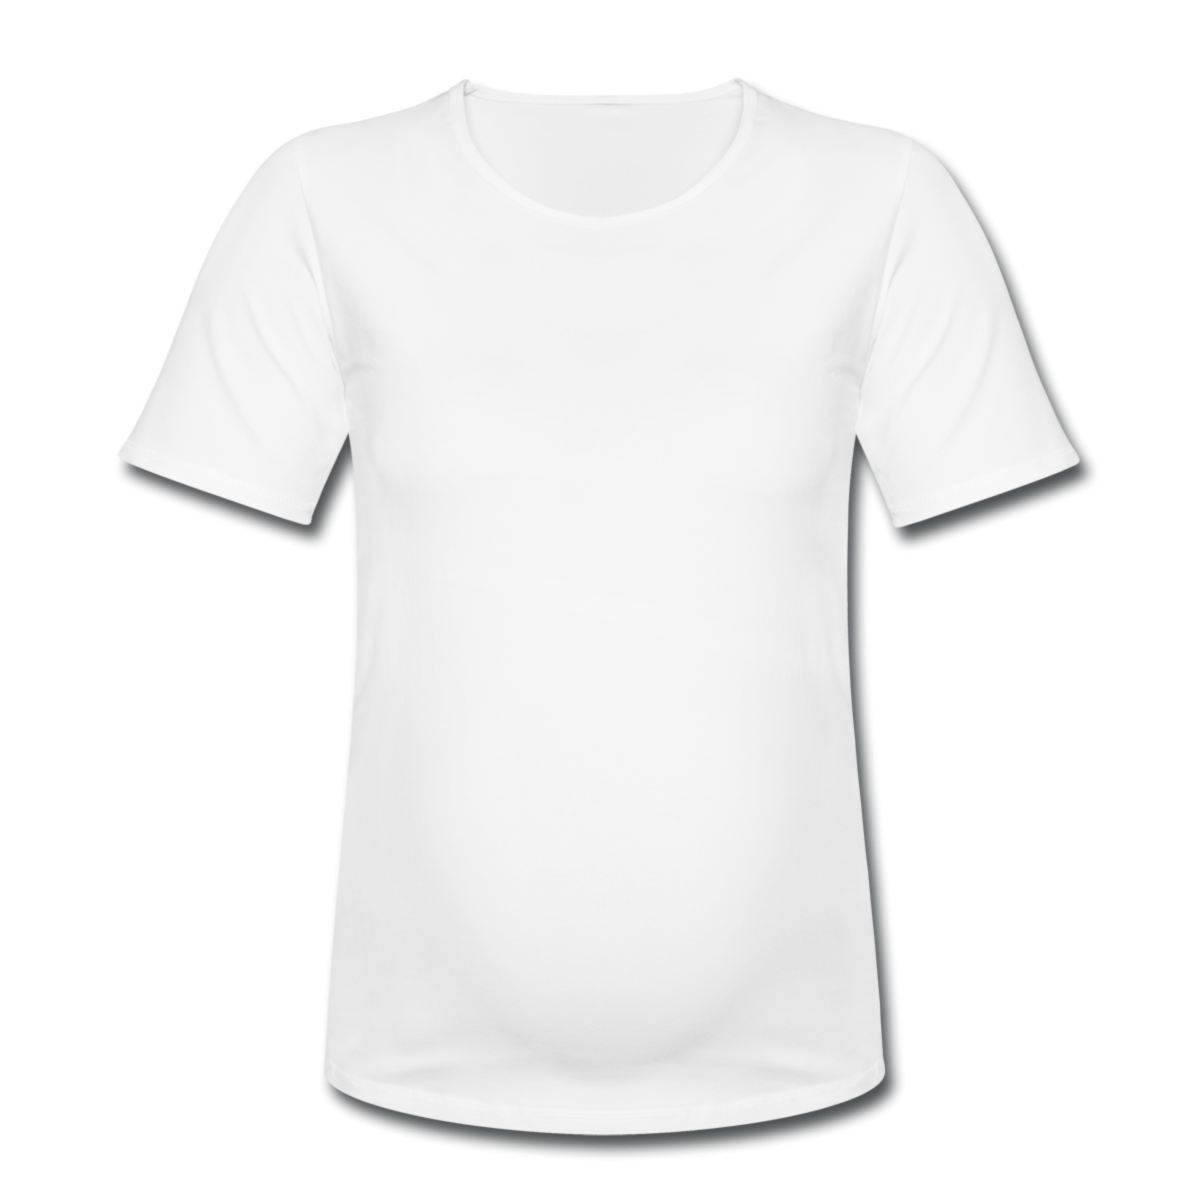 White Blank T Shirt - Clipart library